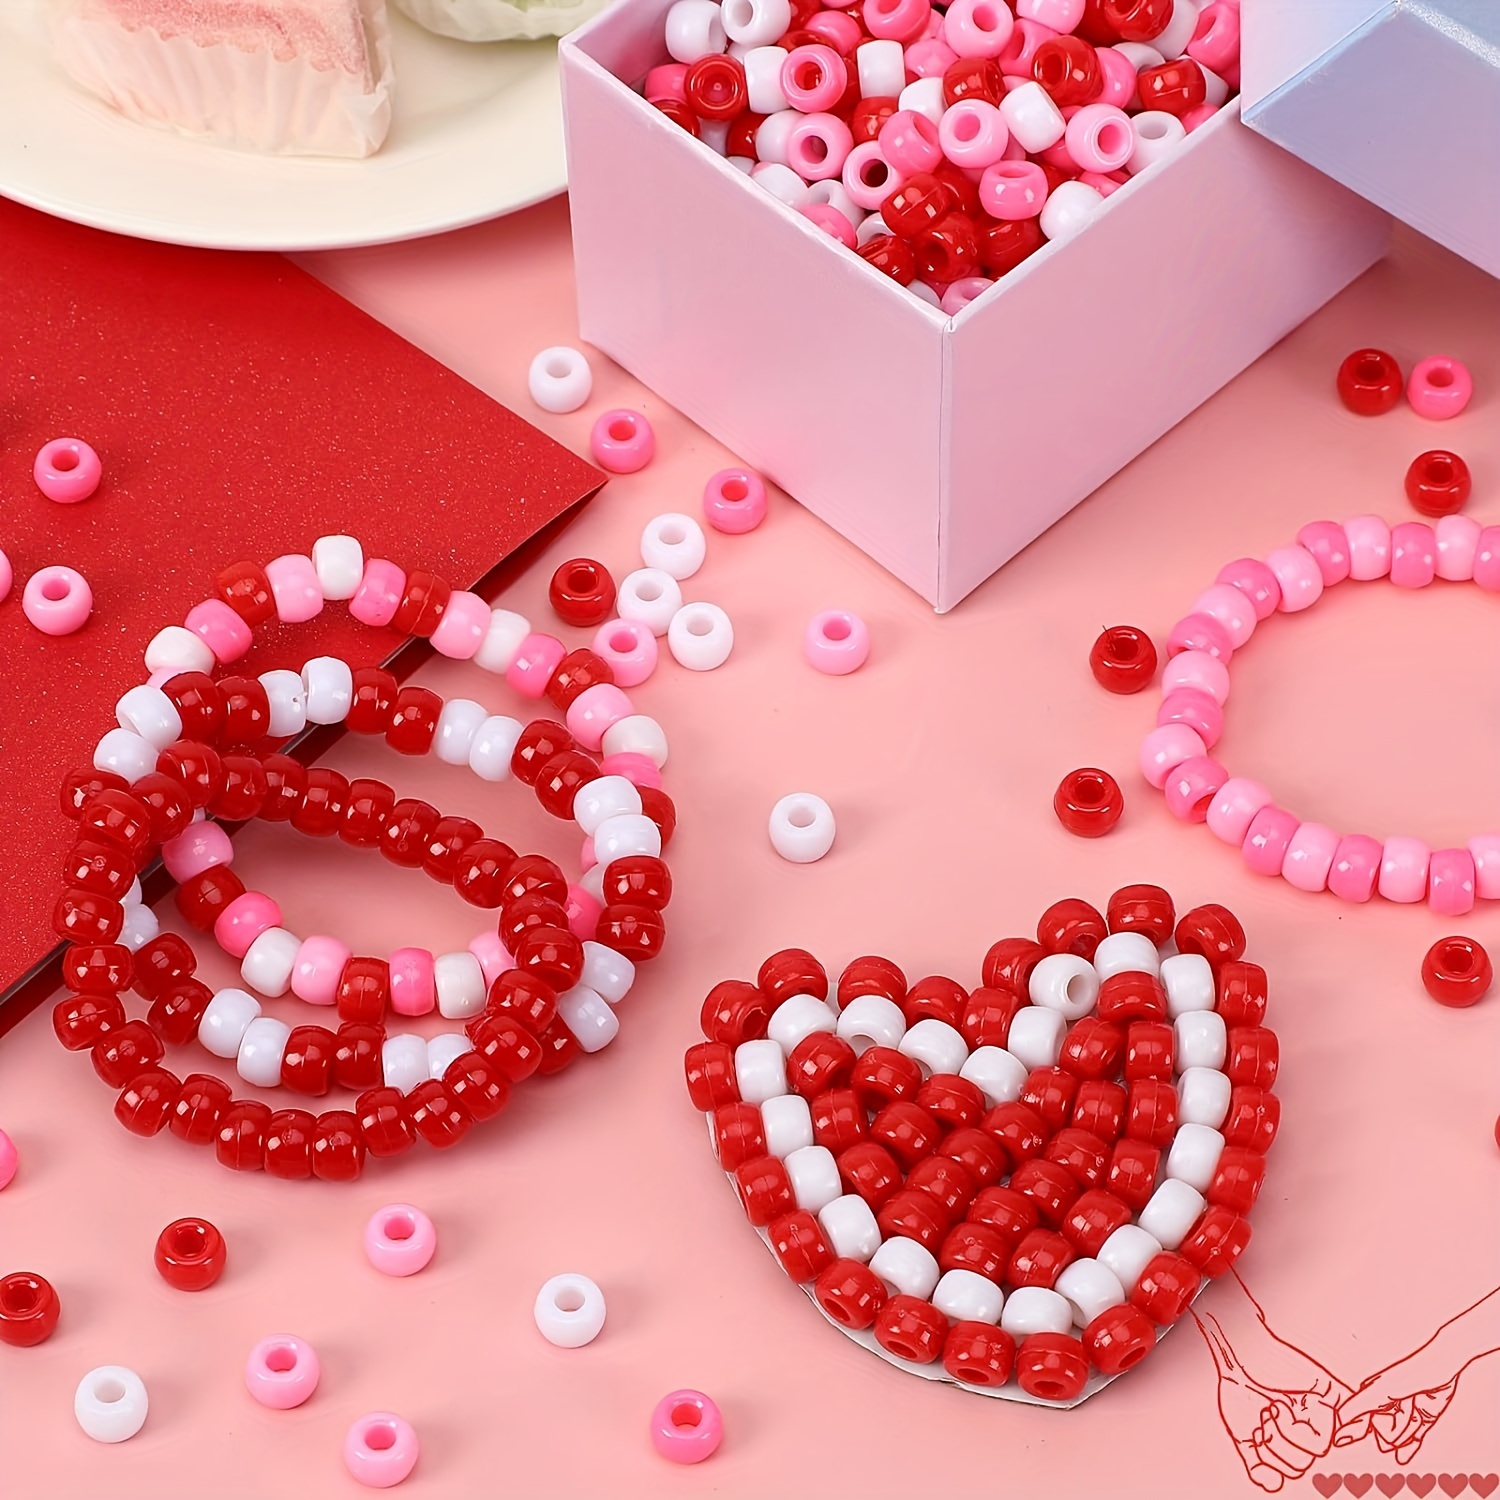 Pink Heart Beads for Valentine's Day, Vday Beads for Jewelry